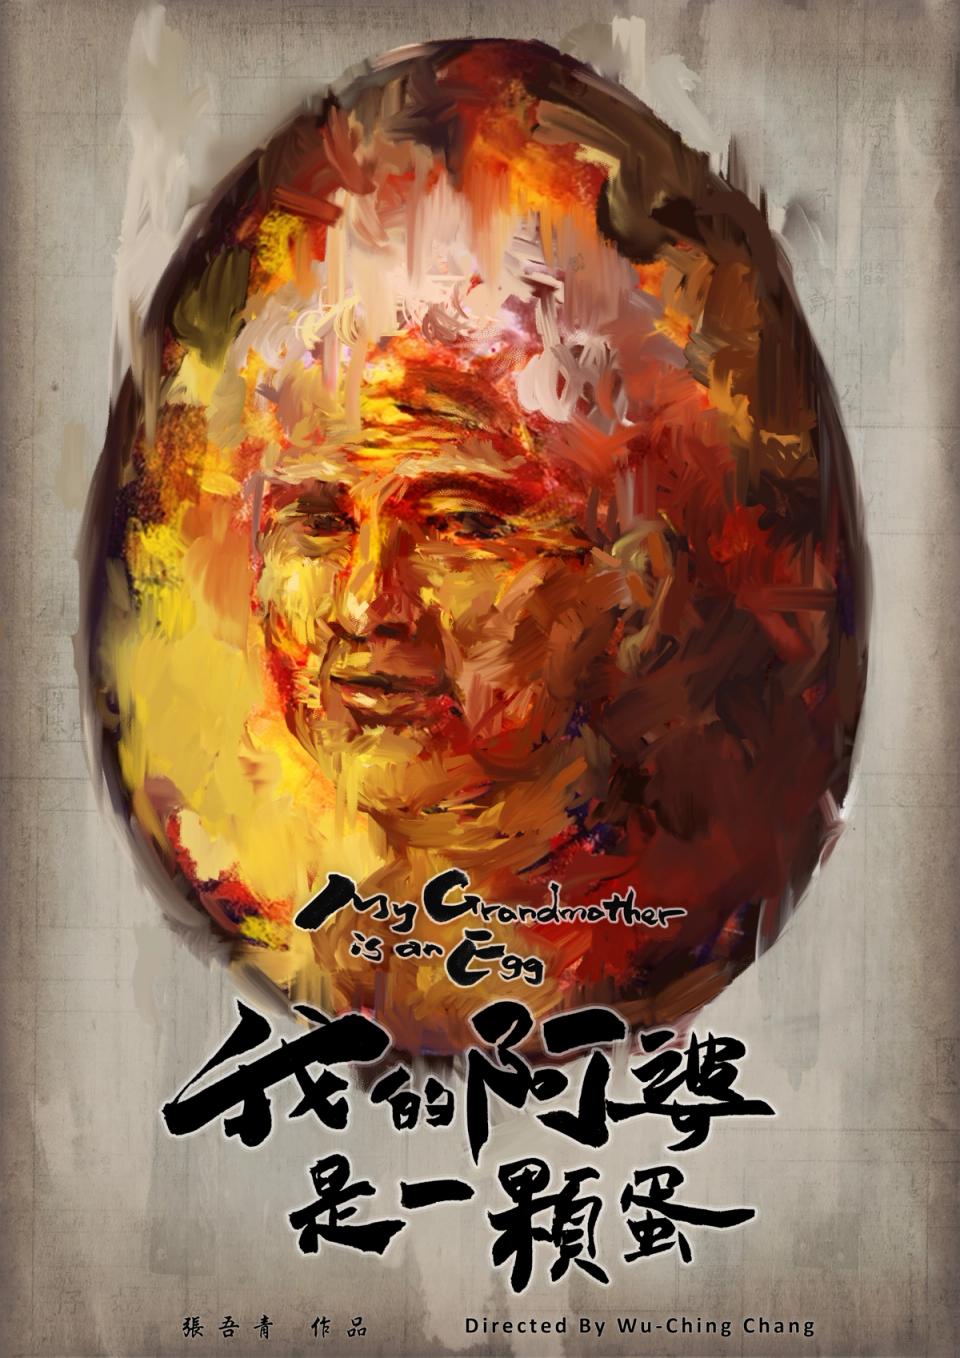 Wu-Ching Chang's My Grandmother is an Egg